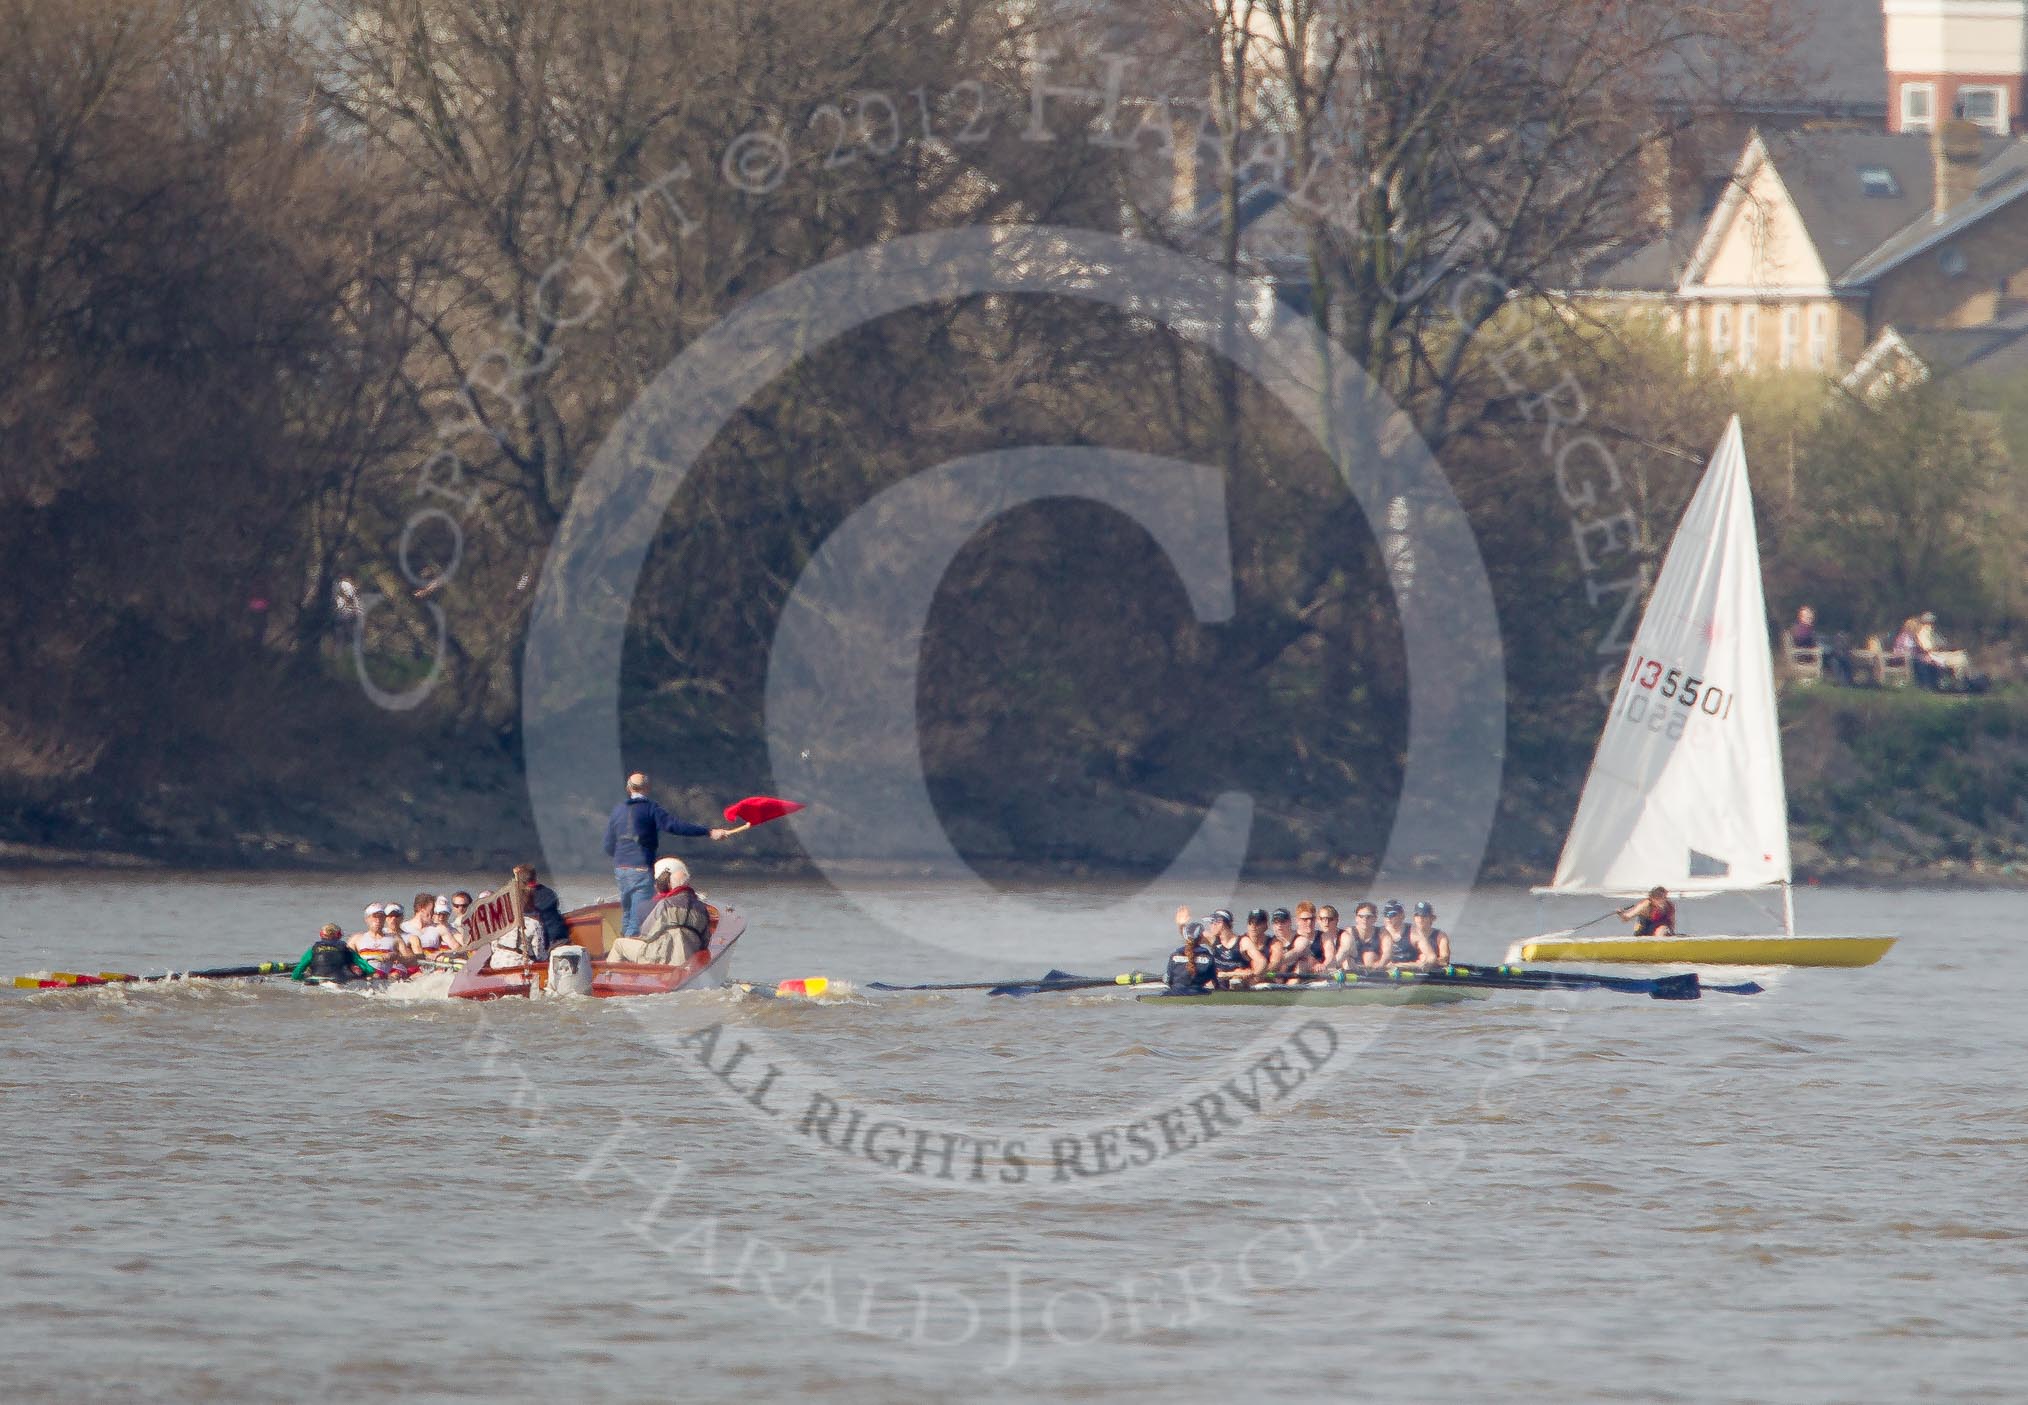 The Boat Race season 2012 - fixture OUBC vs Leander: Umpire Boris Rankov red-flagging the race between the Tideway Scullers, on the left, rand OUBC's Isis team..




on 24 March 2012 at 14:02, image #88